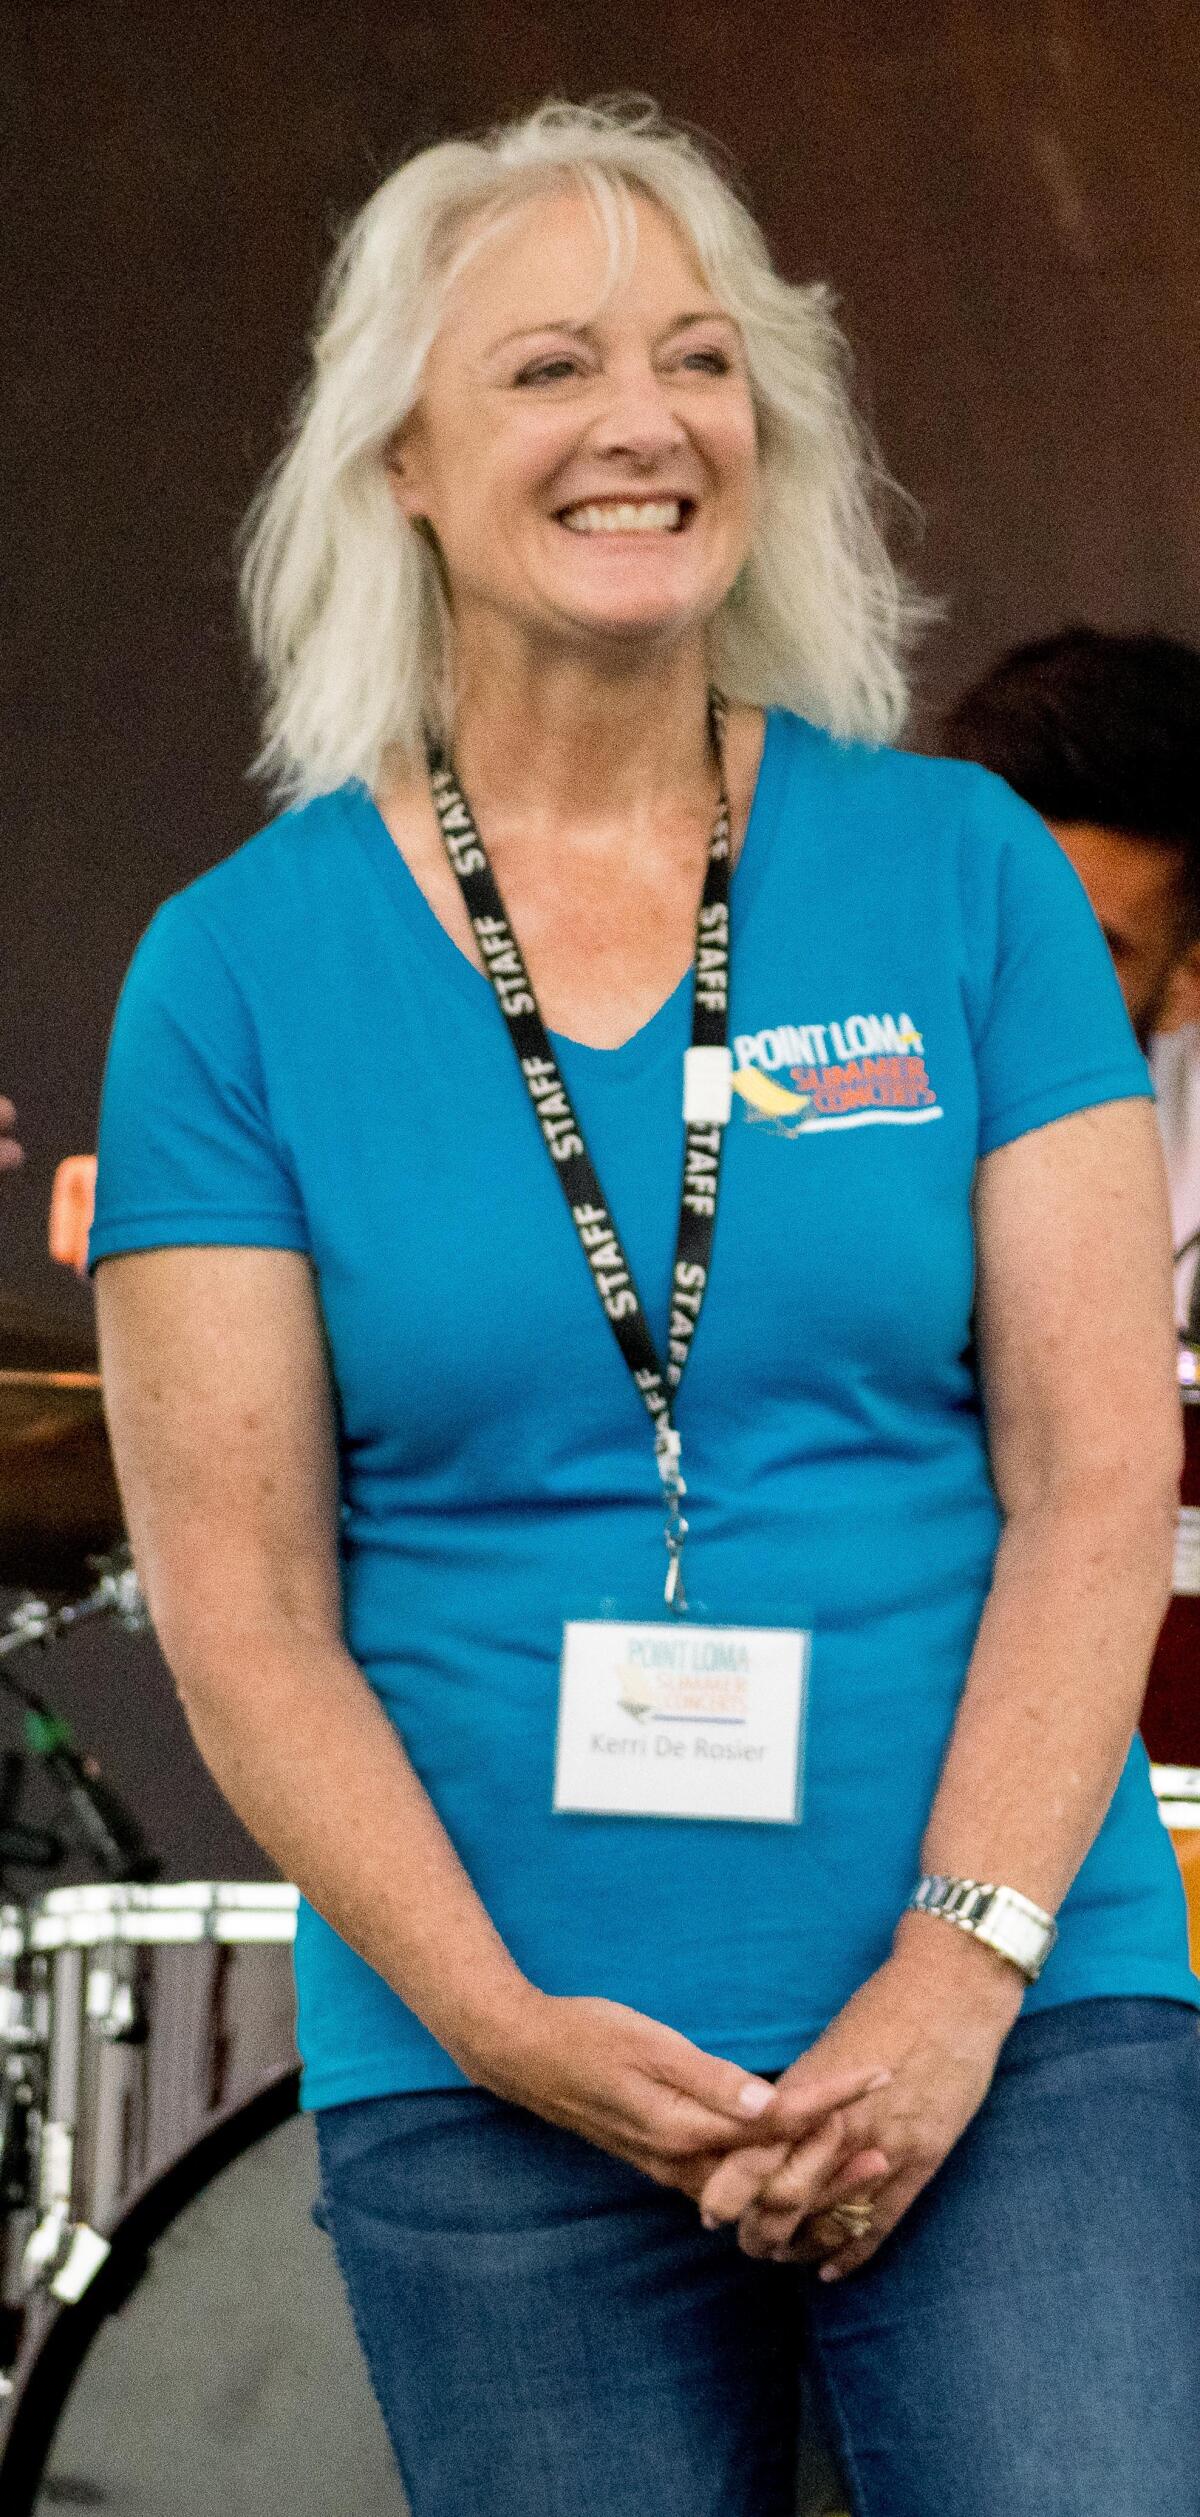 Kerri De Rosier began volunteering for Point Loma Summer Concerts around 2002 and has been the series' chairwoman since 2018.